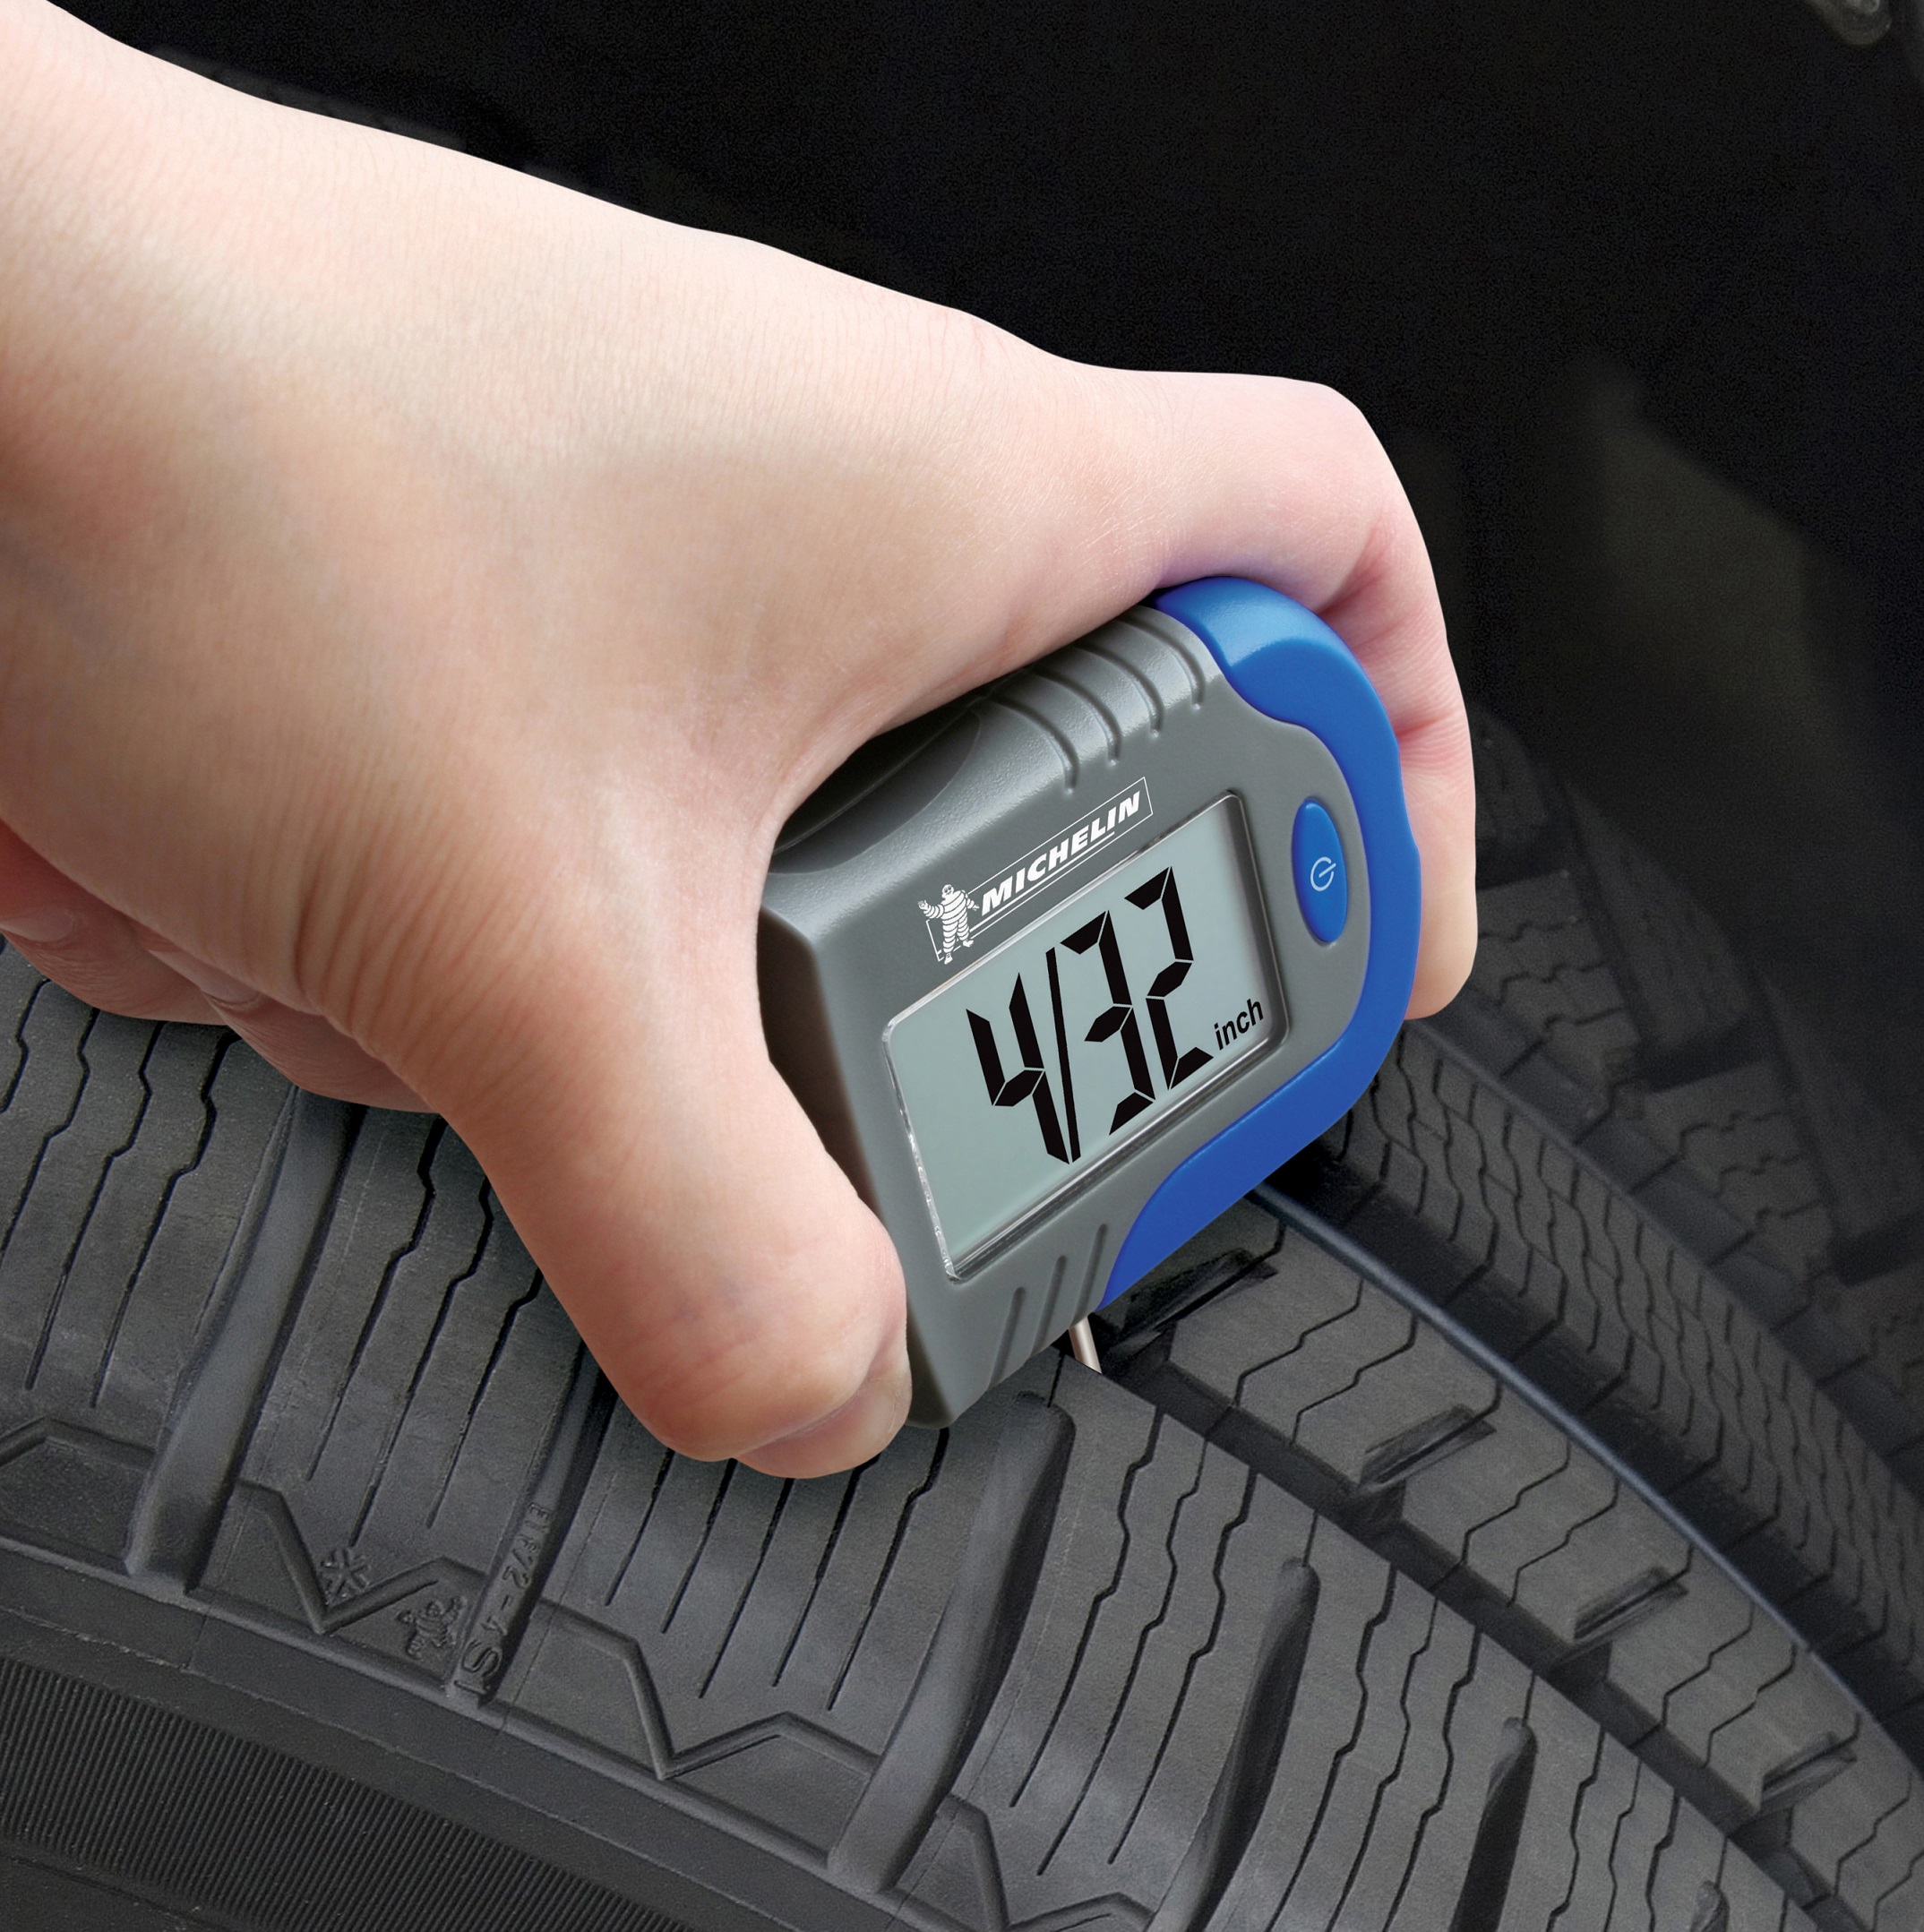 Michelin Shares Tips to Keep Tires in Best Shape During Summer